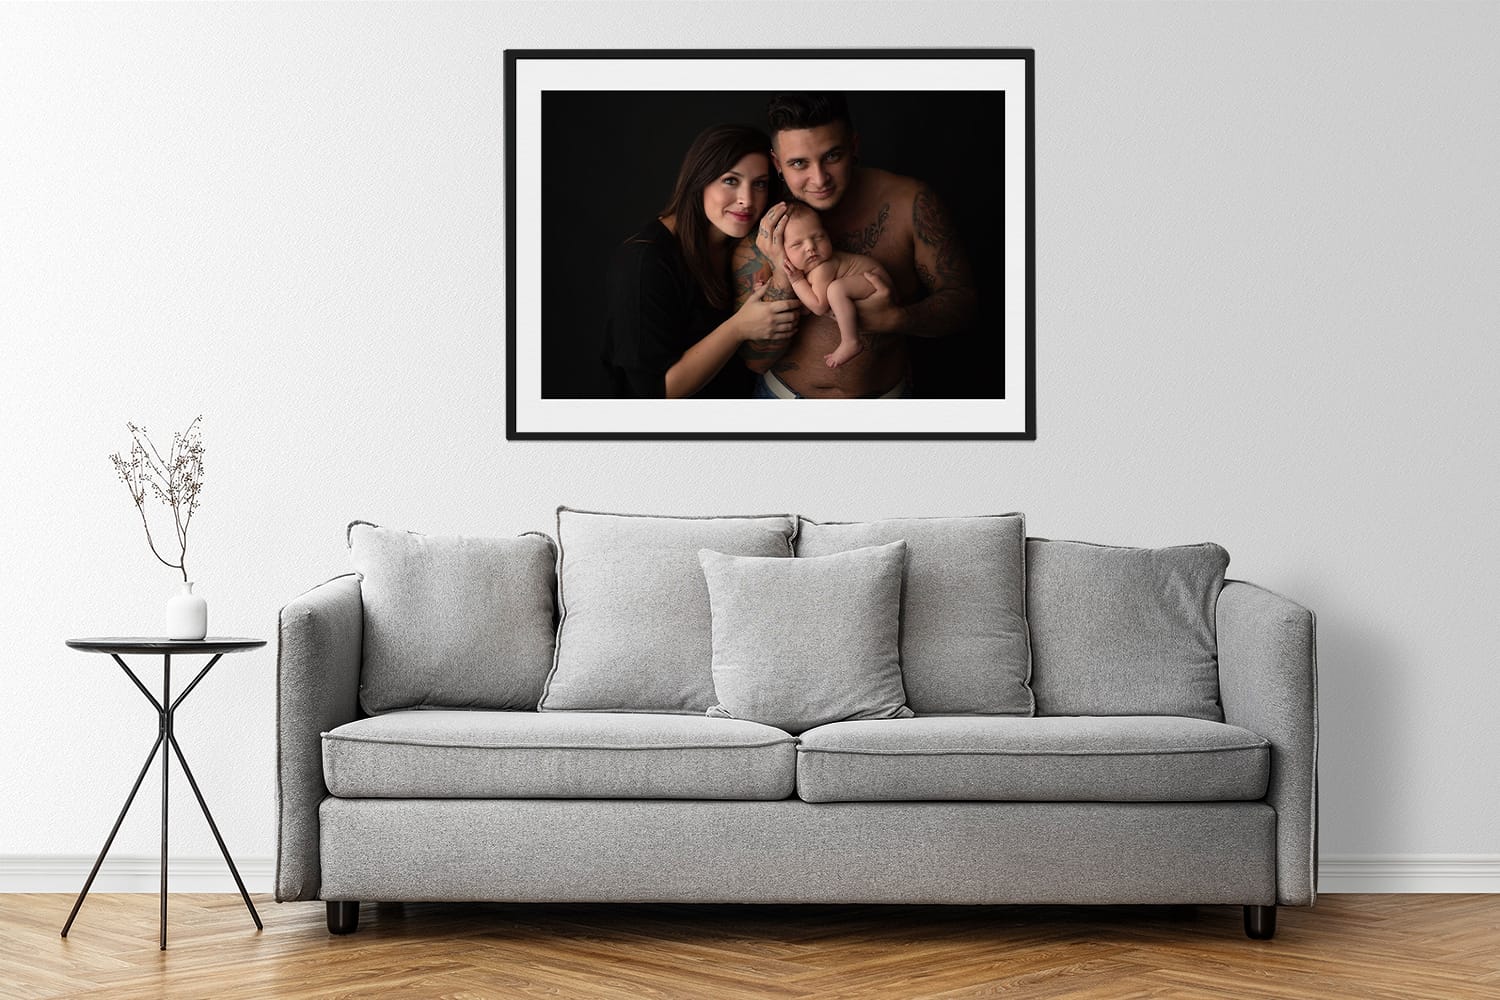 modern armchair in a minimal decor living room with wall art photo of new parents with baby boy